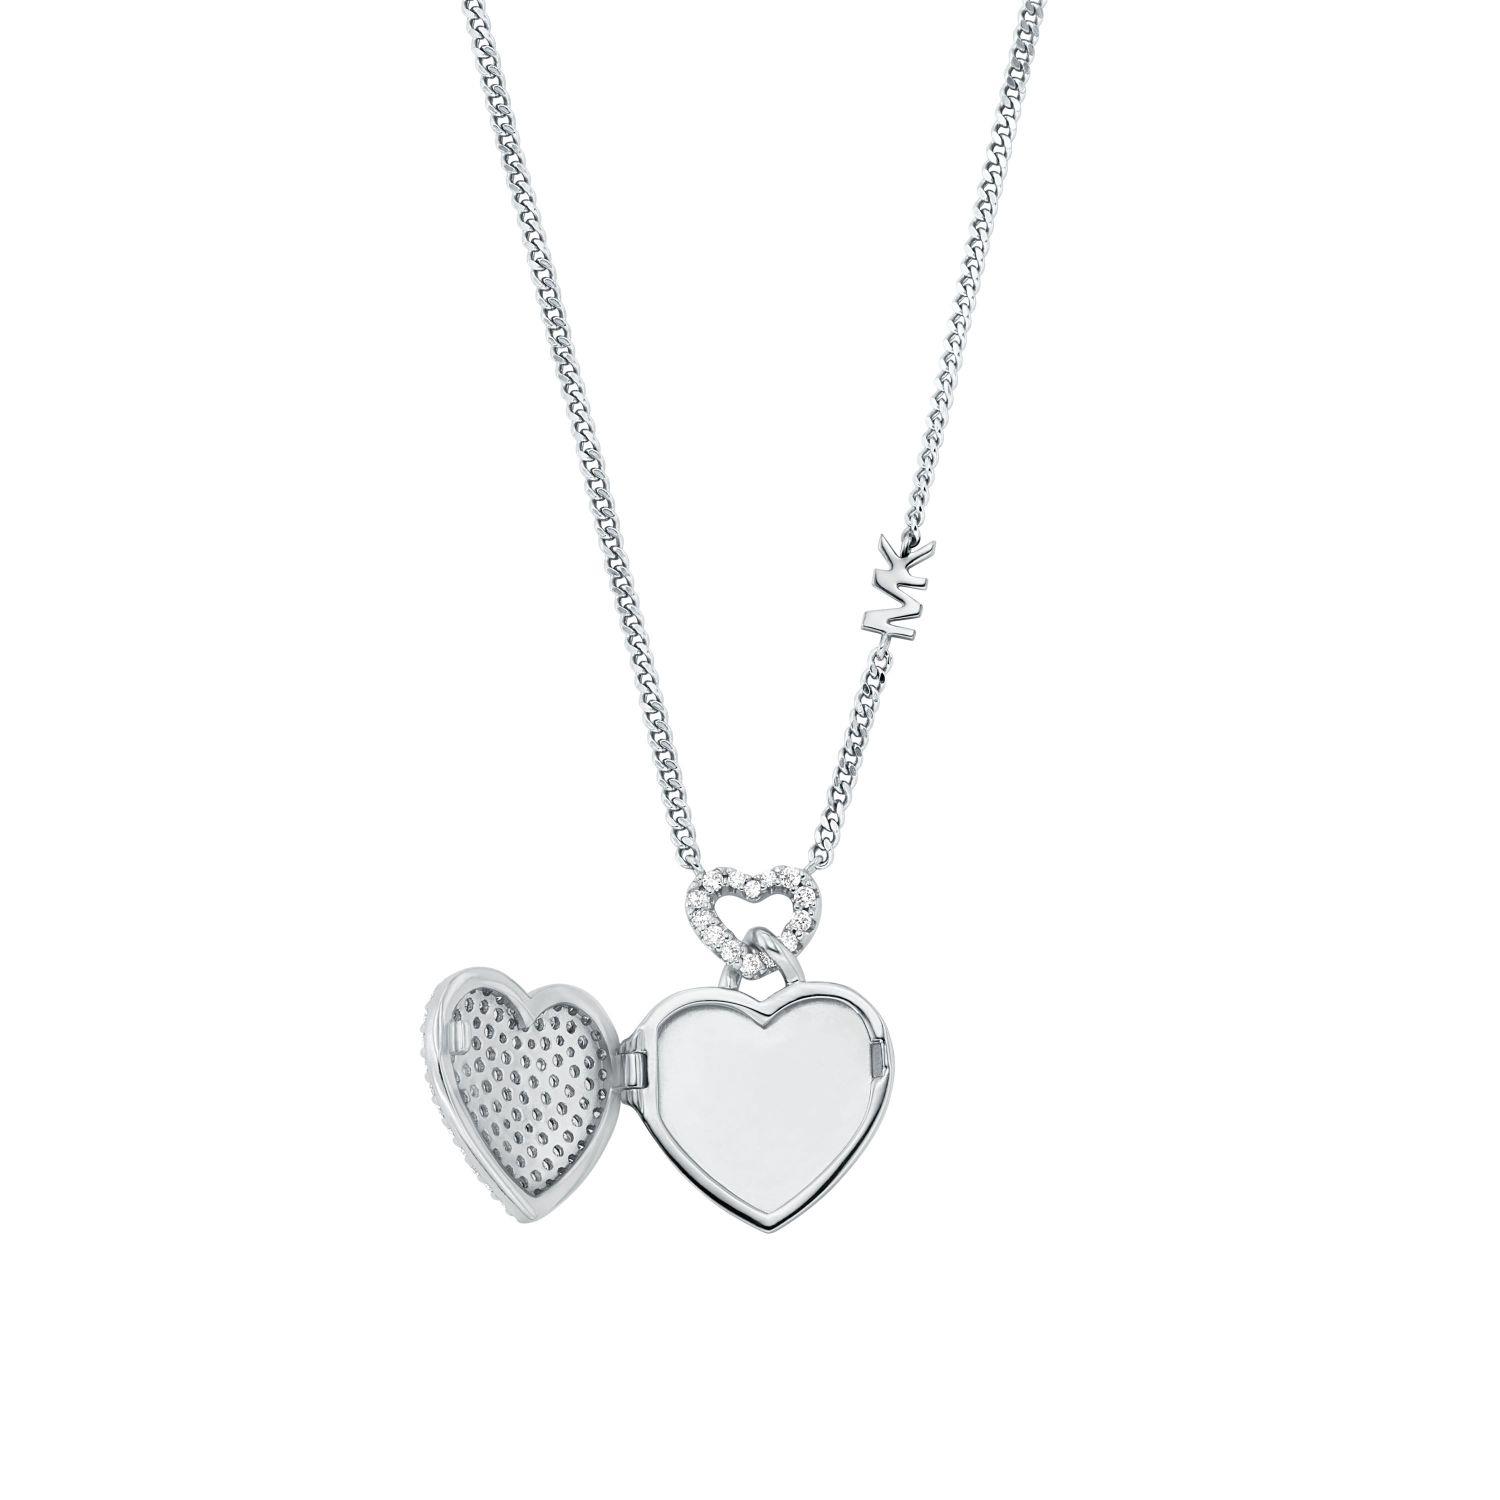 Michael Kors 14k Rose Gold-Plated Sterling Silver Crystal Heart Halo Pendant  Necklace, 16